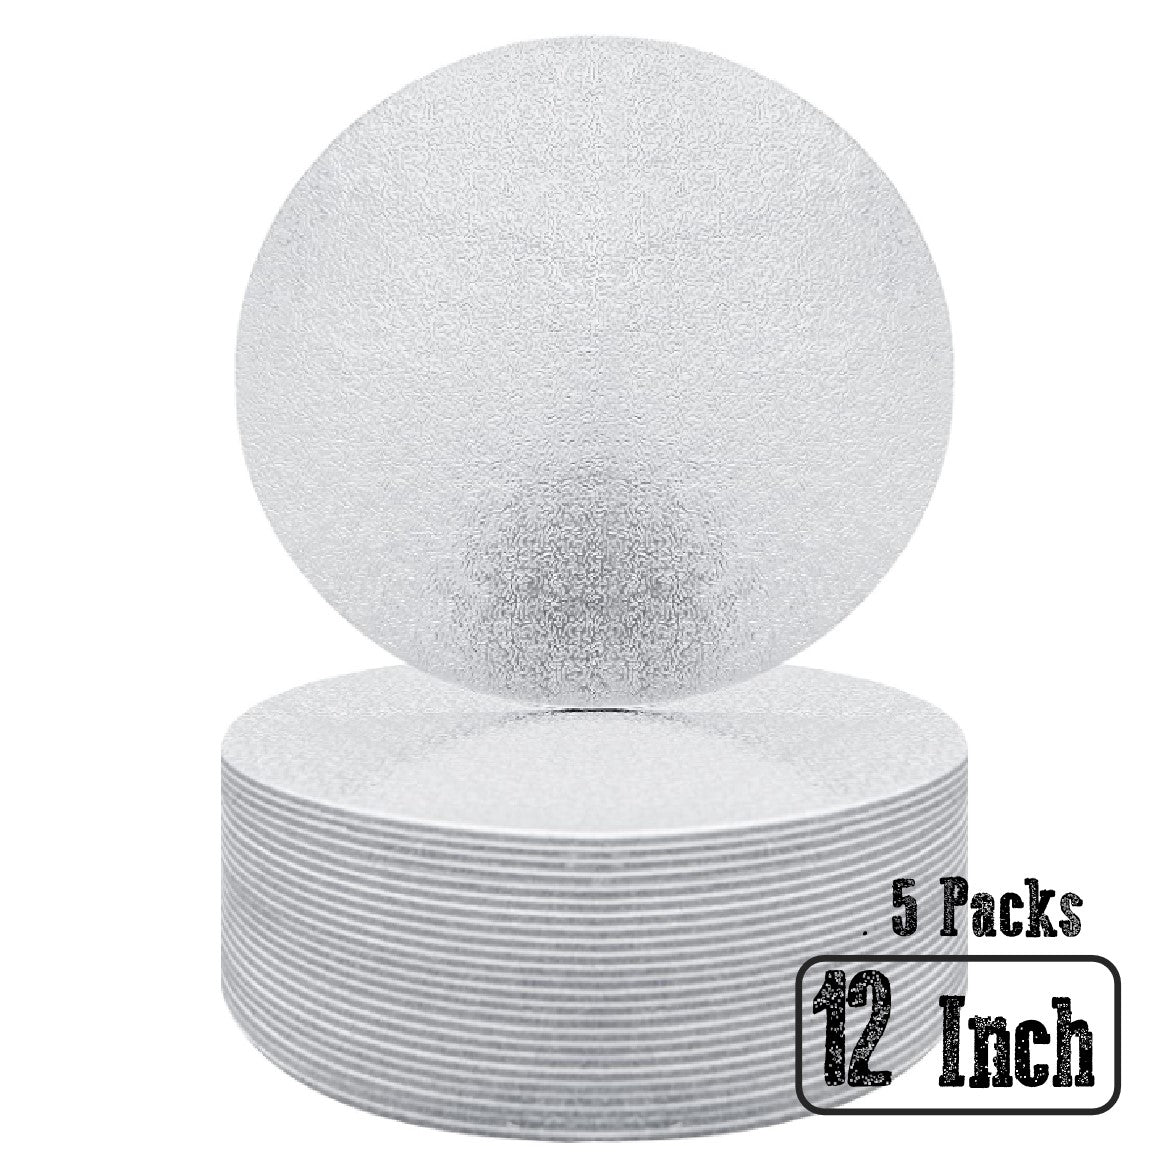 Cake Board Bases- 12 inch size, 5 Pack of silver cake base boards - Rampant Coffee Company